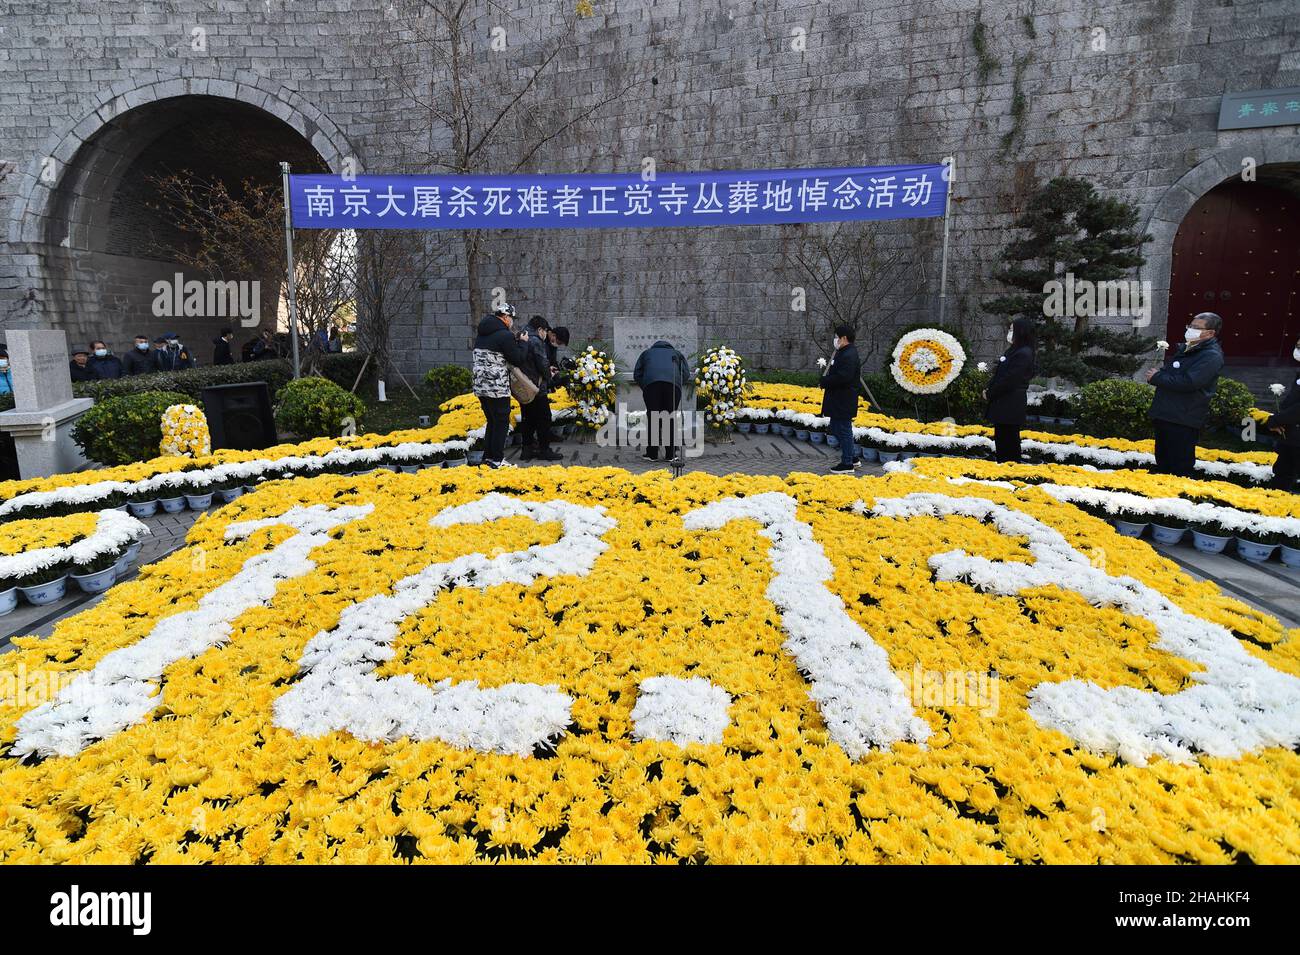 Nanjing, Dec. 13. 13th Dec, 1937. People take part in a memorial ceremony to mourn the victims of the Nanjing Massacre on the occasion of the eighth National Memorial Day in Nanjing, capital of east China's Jiangsu Province, Dec. 13, 2021. The Nanjing Massacre took place after the Japanese troops captured the city on Dec. 13, 1937. Over six weeks, they killed about 300,000 Chinese civilians and unarmed soldiers in one of the most barbaric episodes of World War II. Credit: Fang Dongxu/Xinhua/Alamy Live News Stock Photo